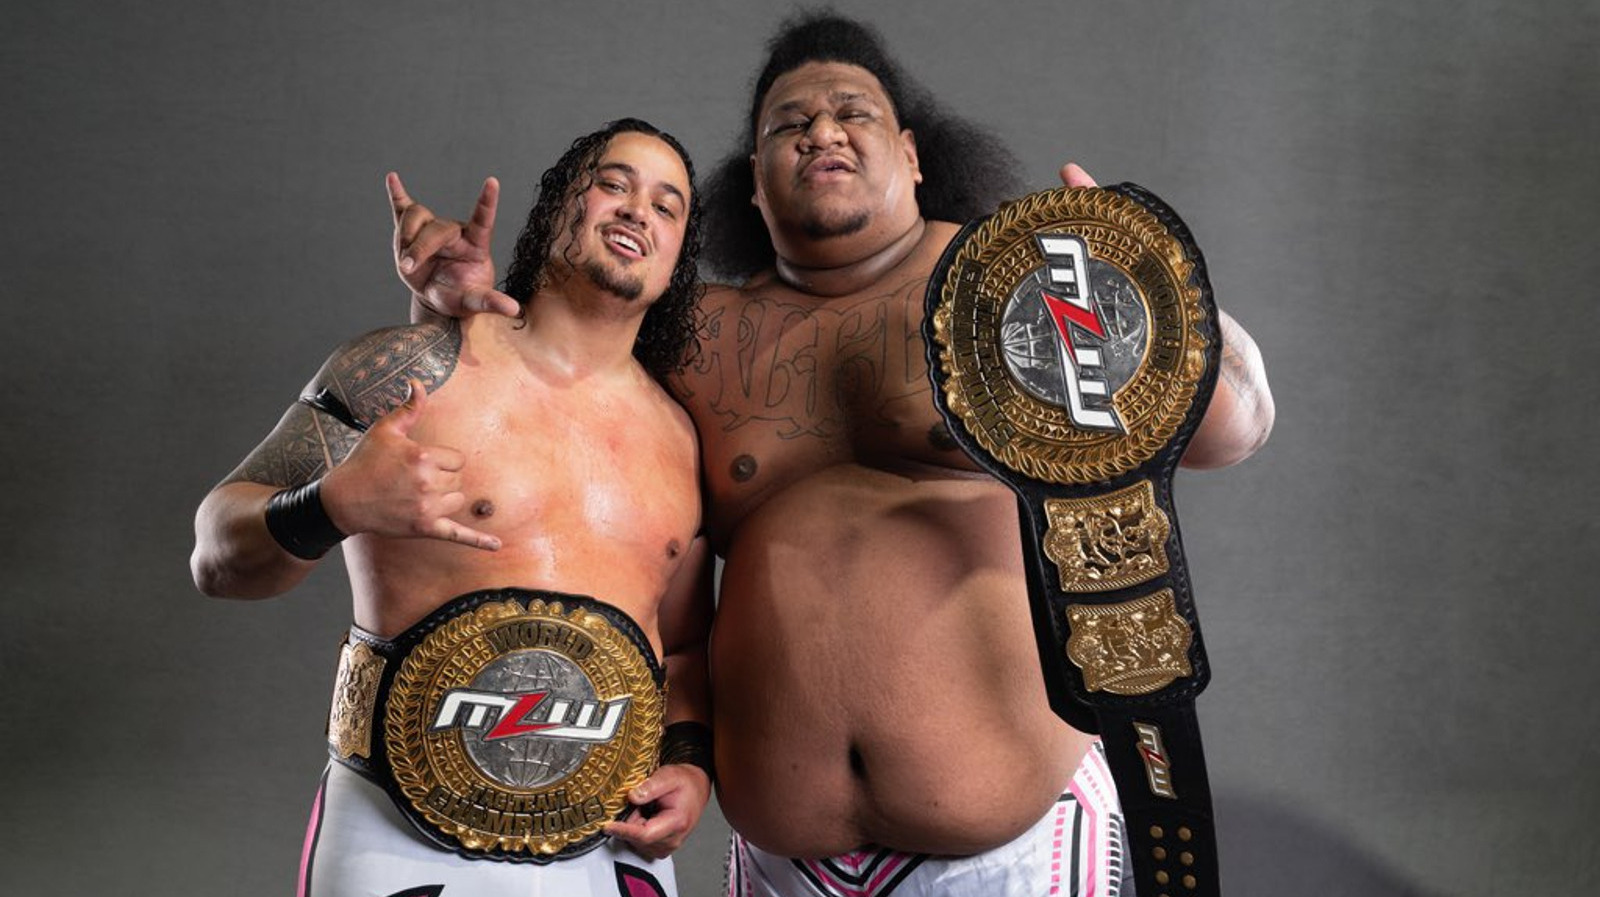 Samoan Swat Team, Former MLW Tag Team Champions, Have Reportedly Been Released